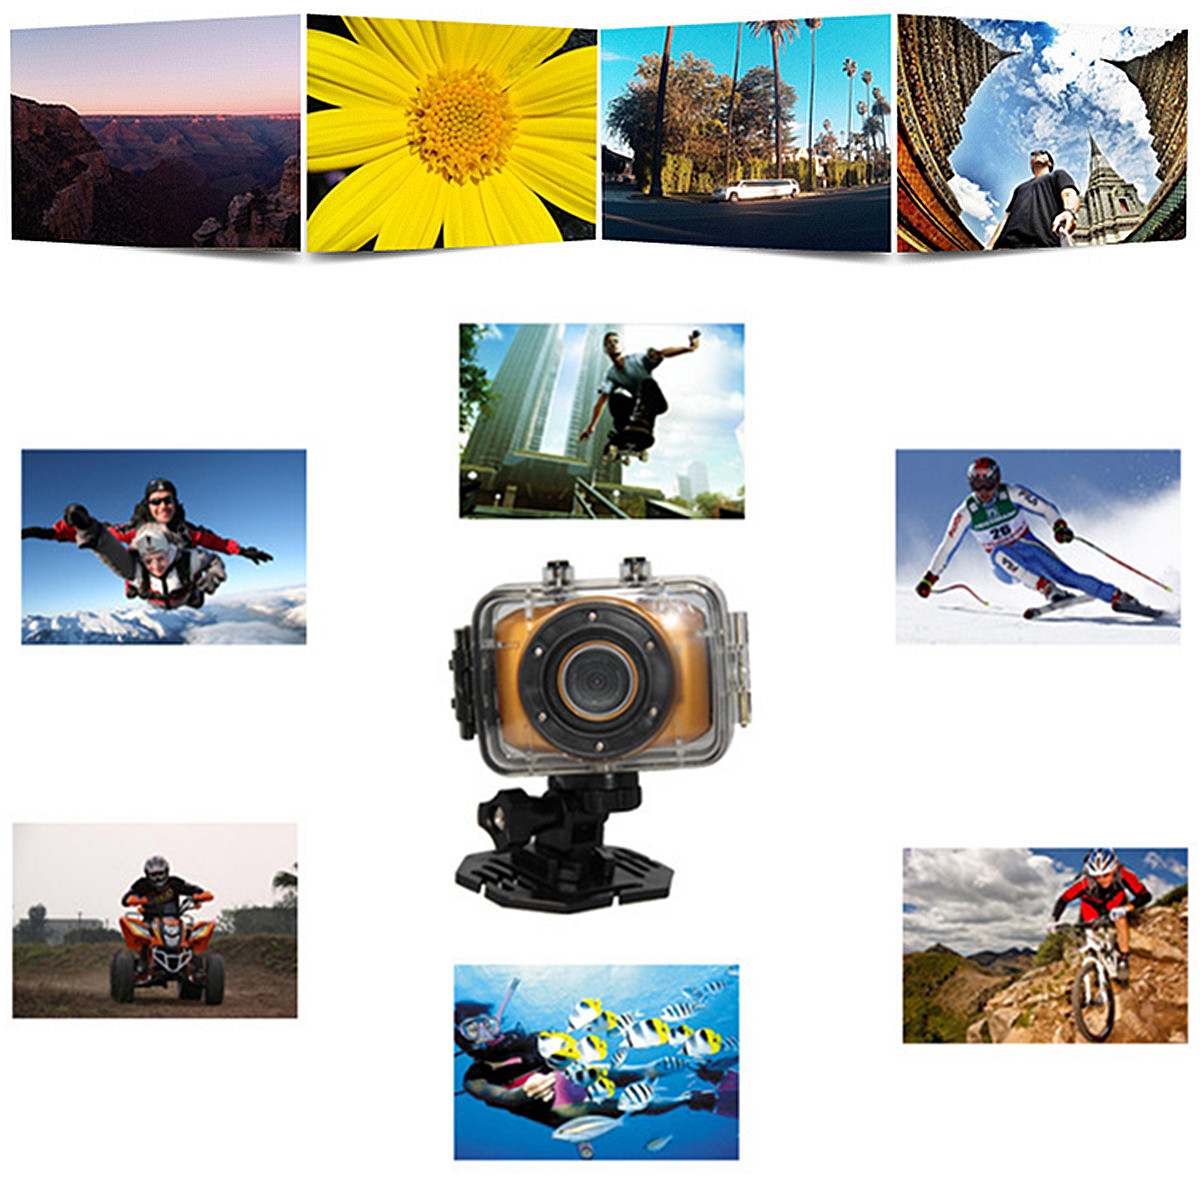 2-Inch-720P-HD-Touch-Screen-Portable-Waterproof-Mini-Action-Outdoor-Sport-Camera-DV-Camcorder-1336787-3